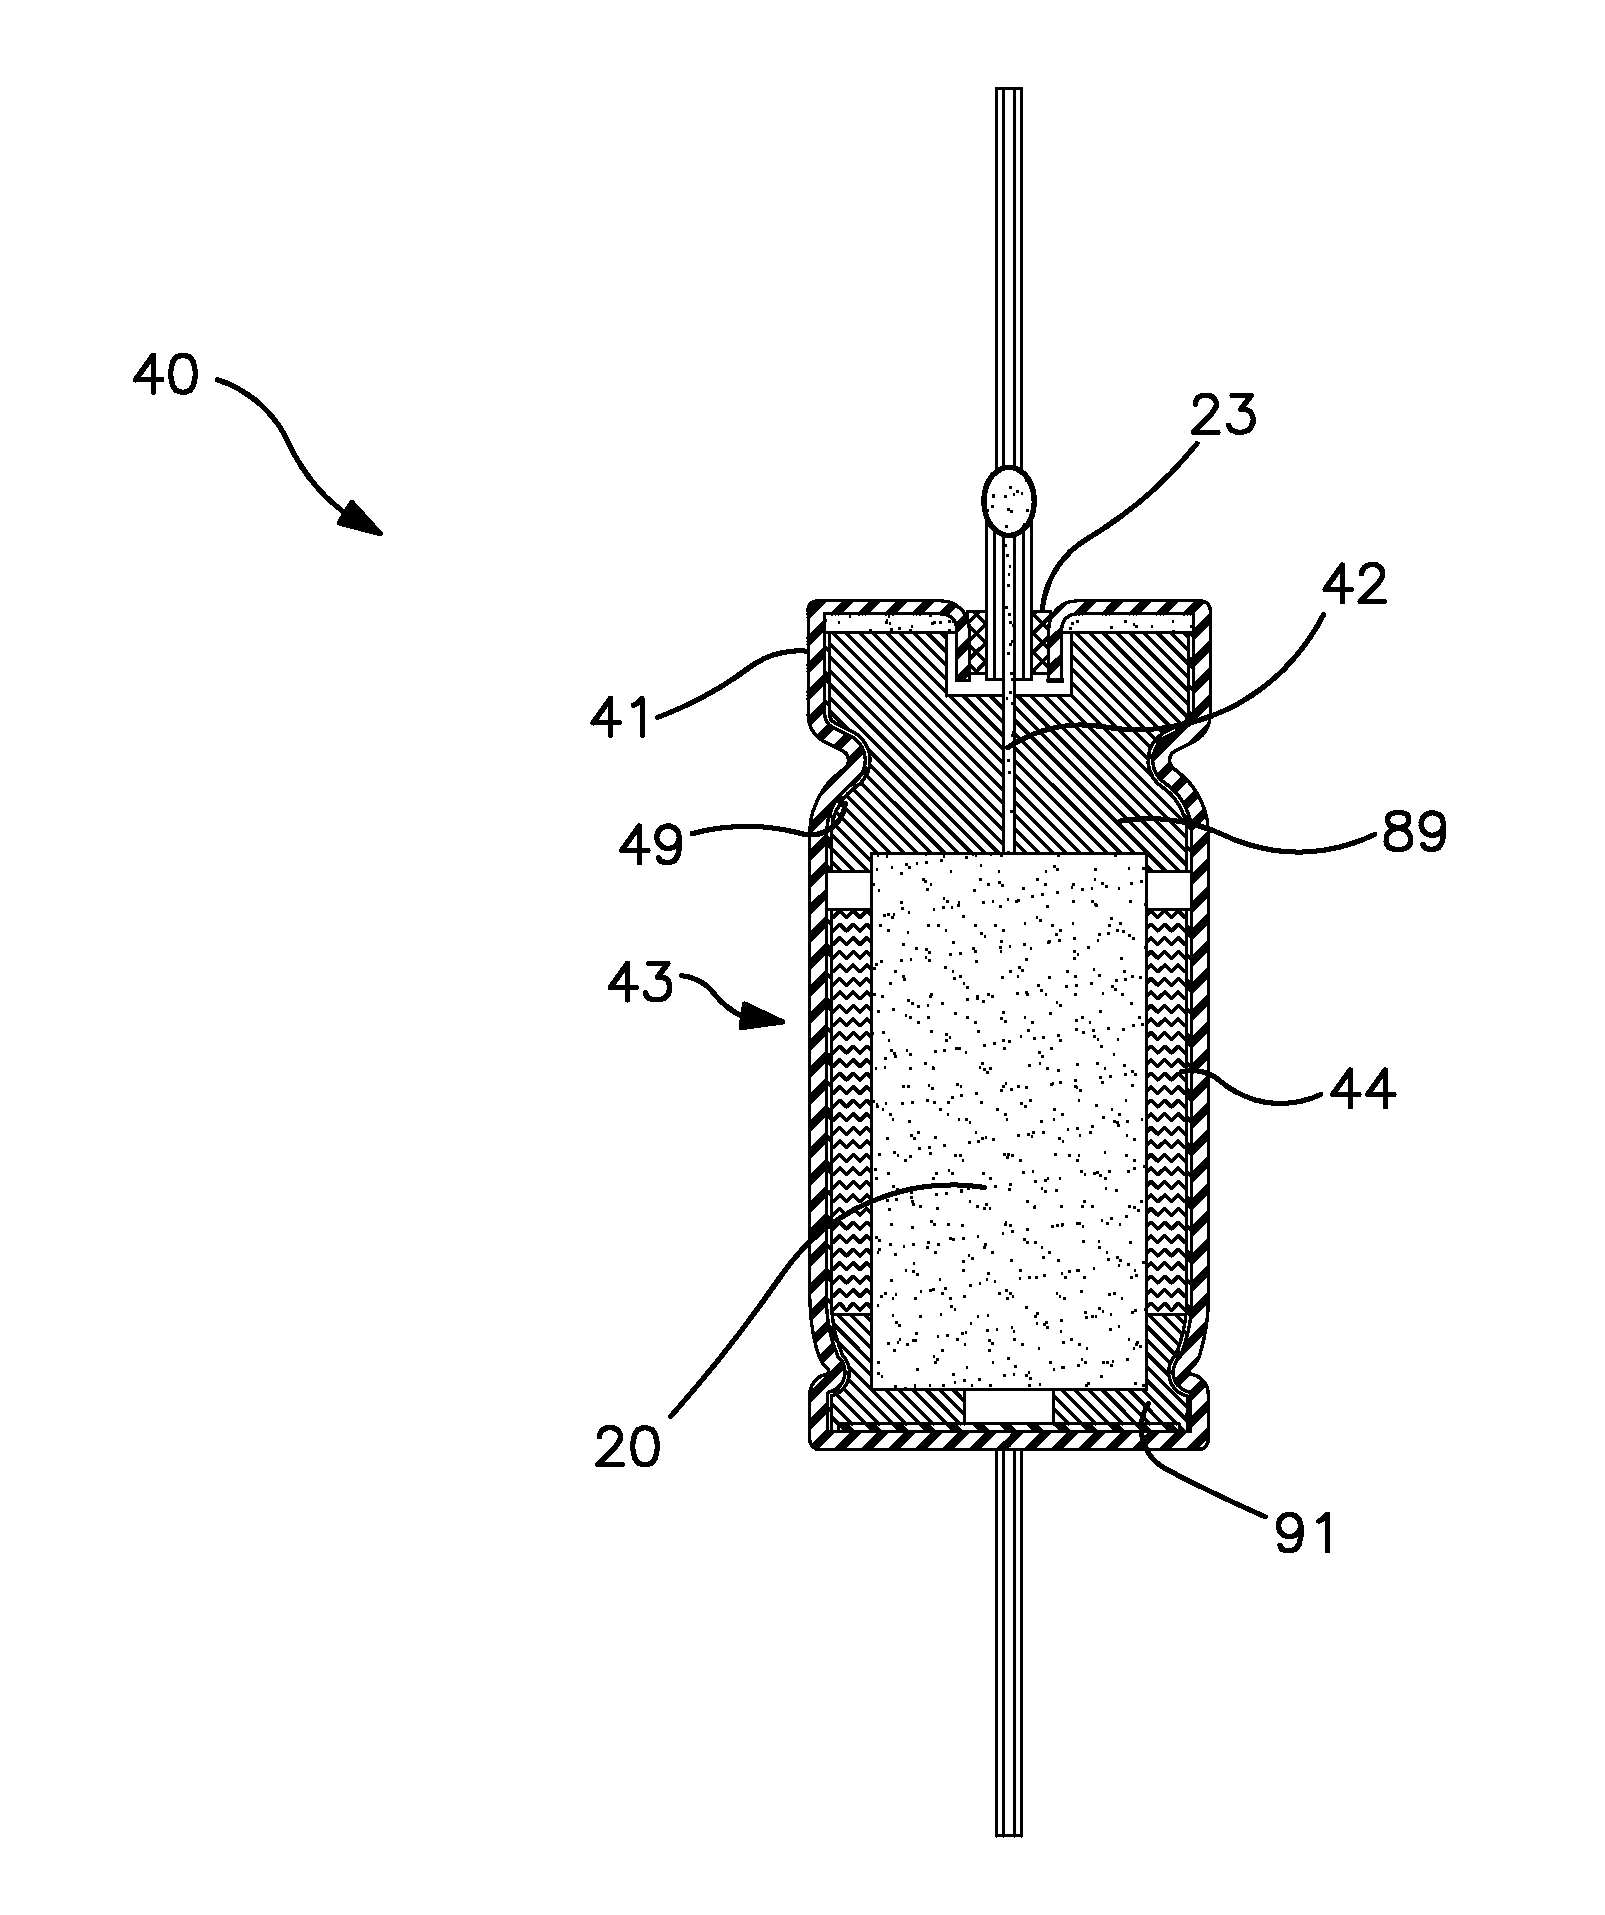 Abrasive Blasted Conductive Polymer Cathode for Use in a Wet Electrolytic Capacitor